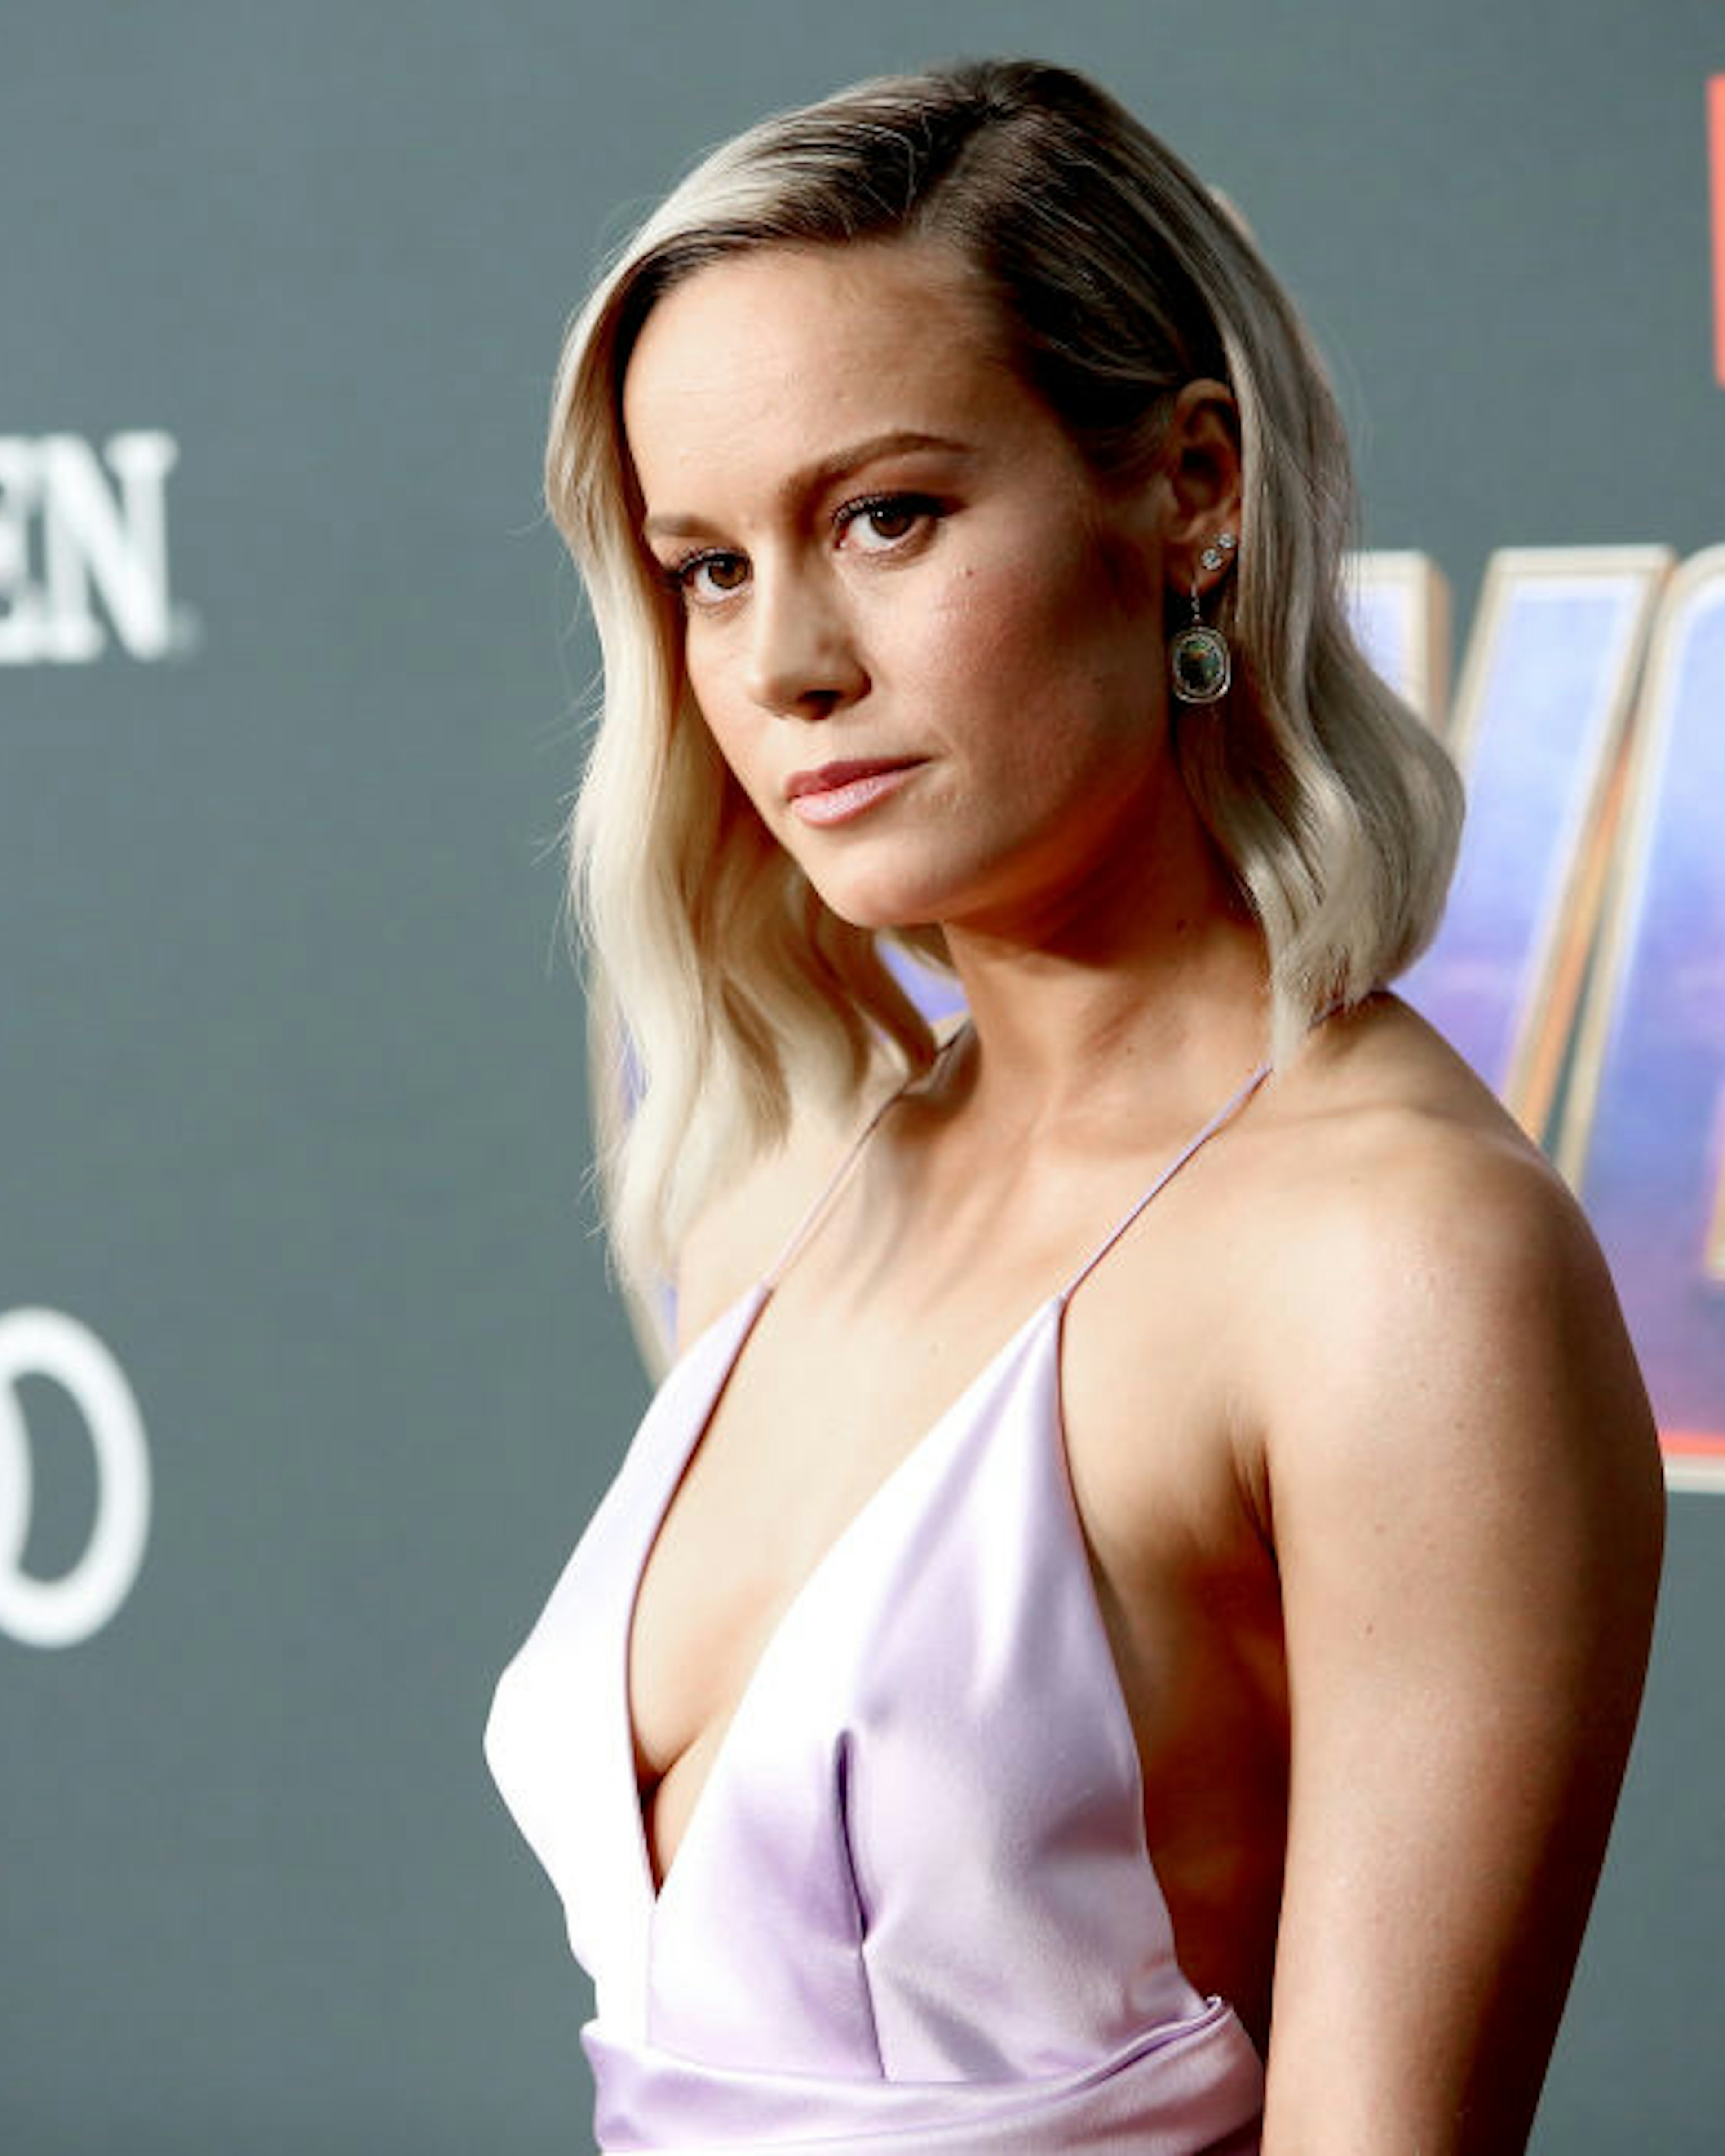 LOS ANGELES, CA - APRIL 22: Brie Larson attends the Los Angeles World Premiere of Marvel Studios' "Avengers: Endgame" at the Los Angeles Convention Center on April 23, 2019 in Los Angeles, California. (Photo by Jesse Grant/Getty Images for Disney)